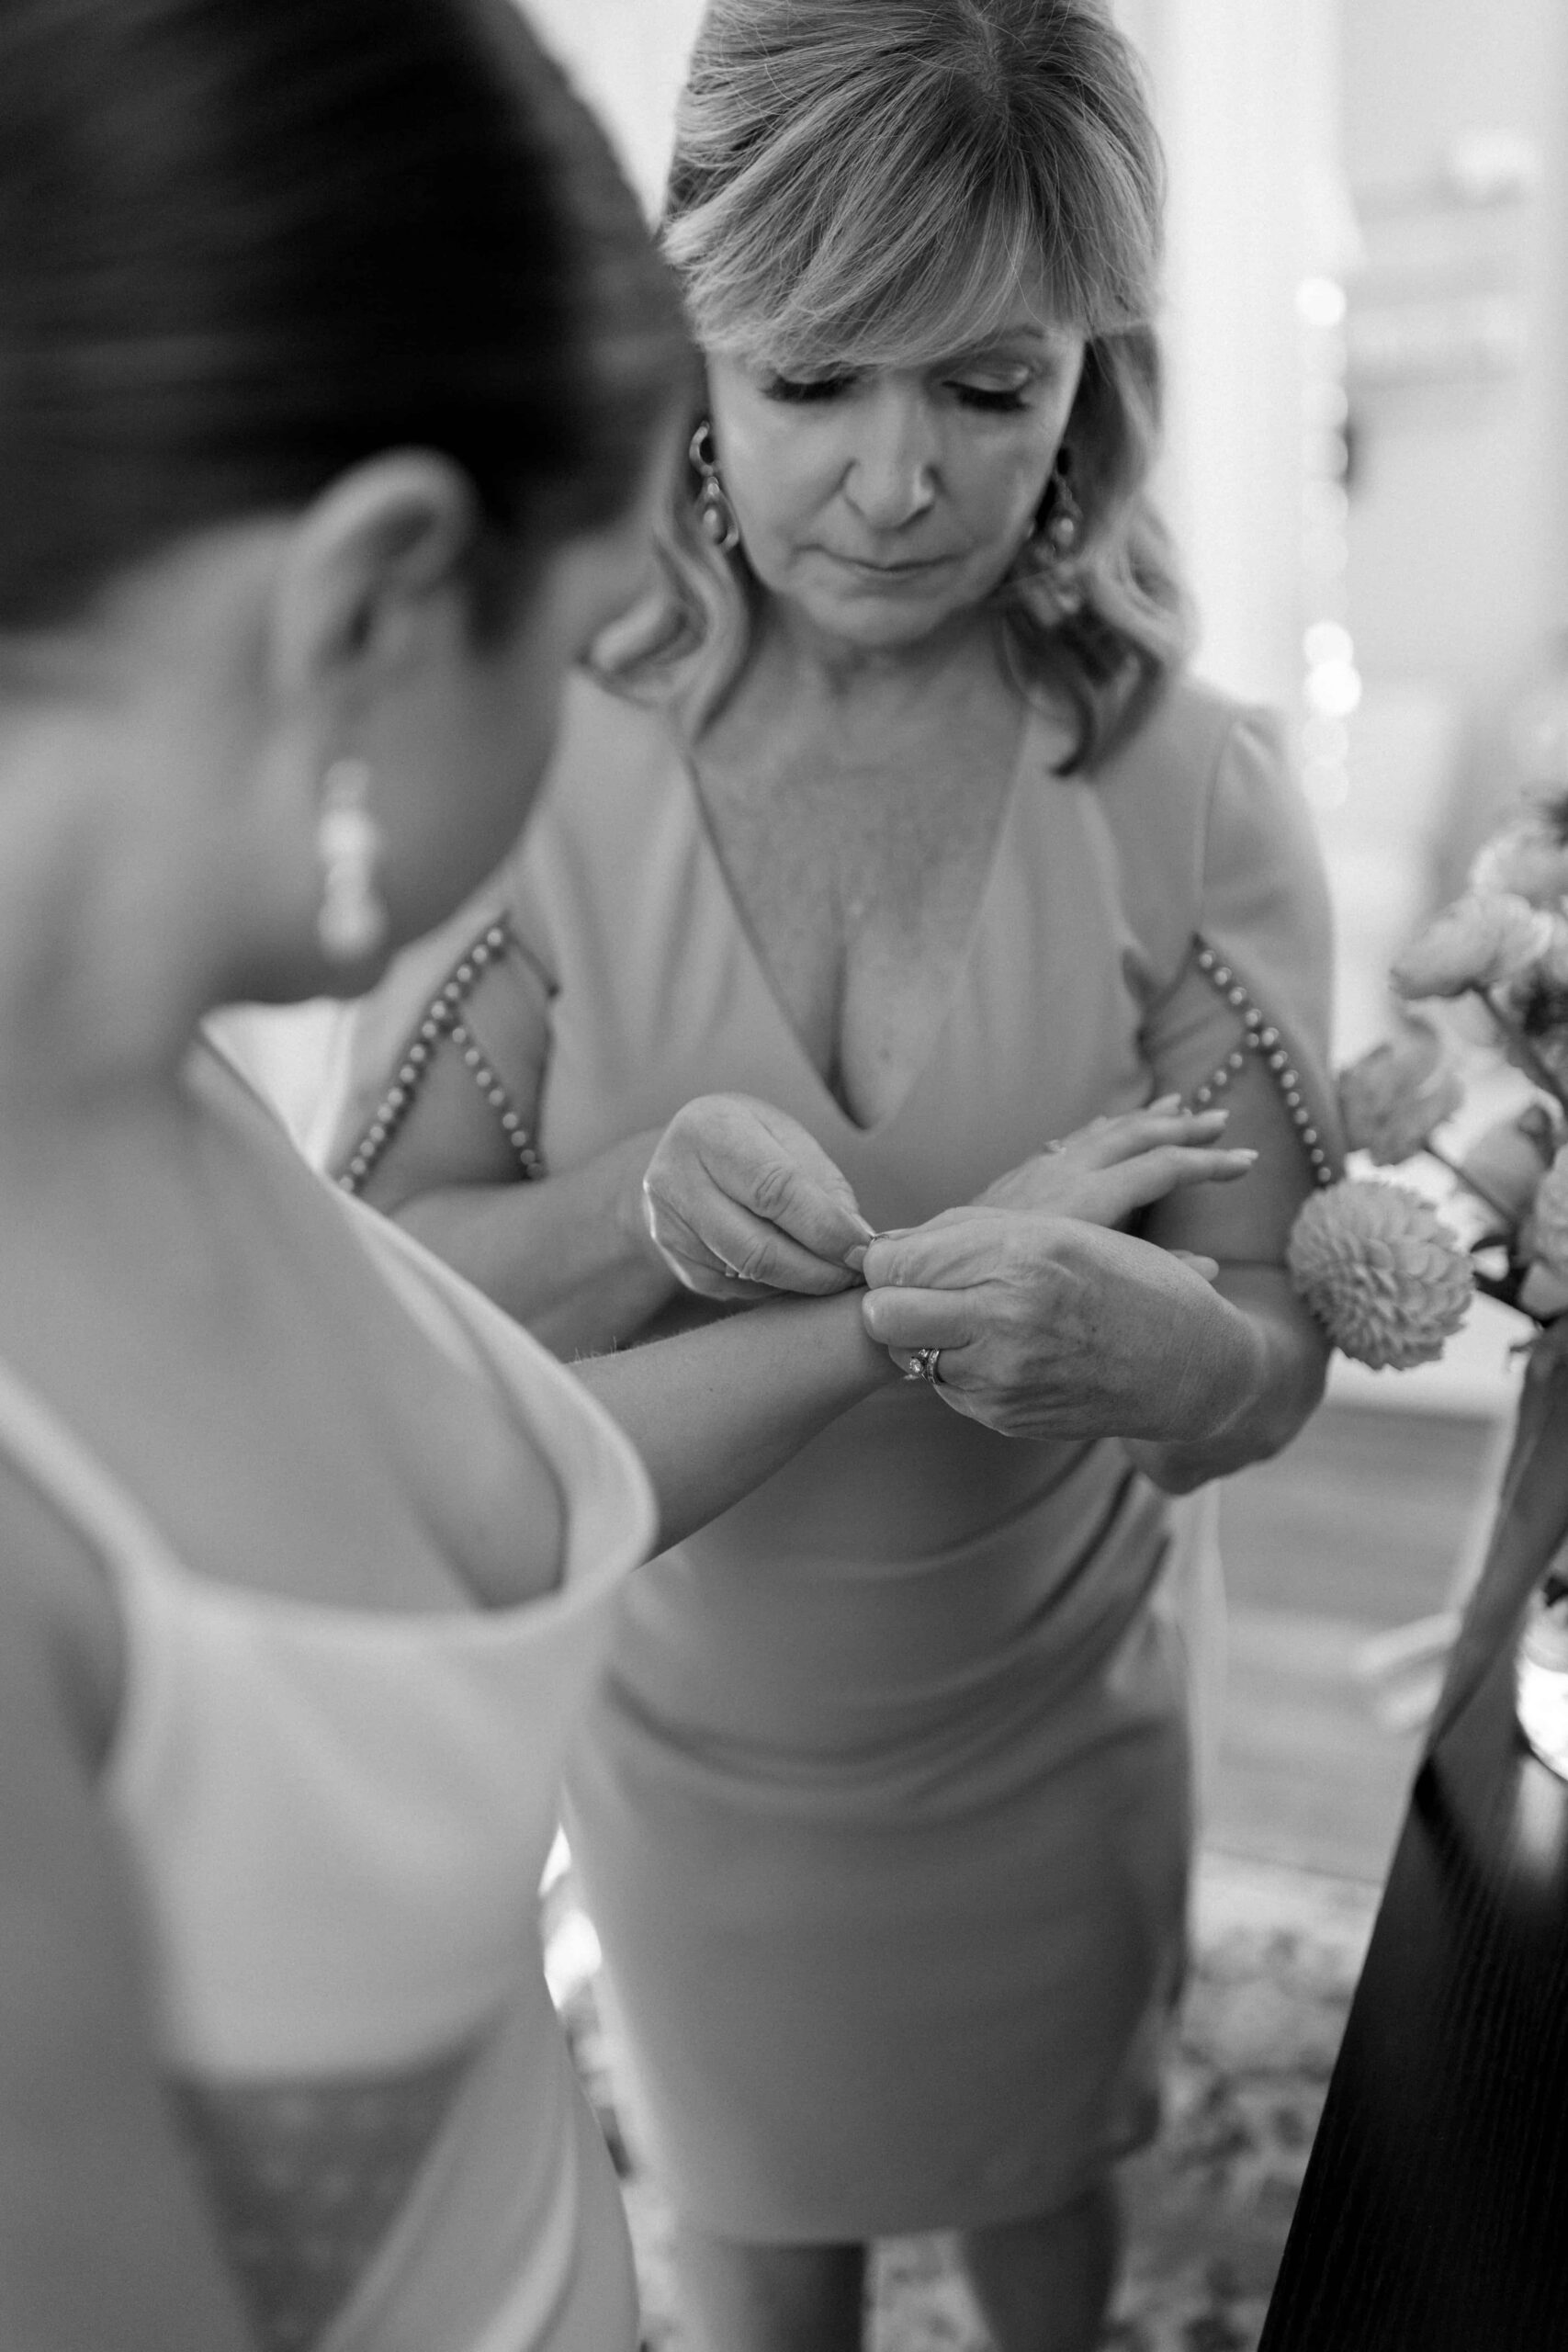 The bride's mom is helping her daughter put on a bracelet. 